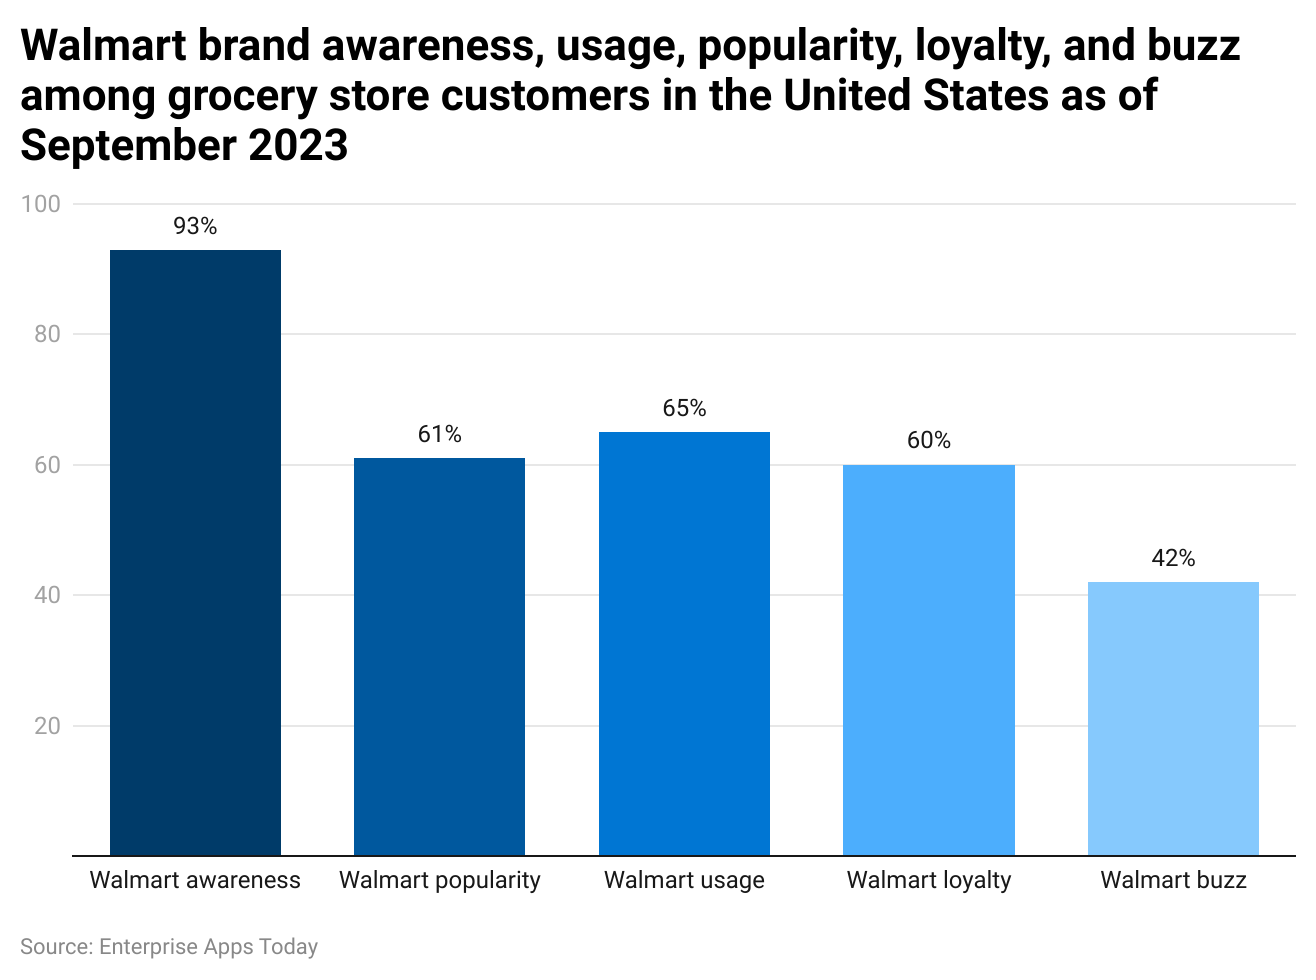 walmart-brand-awareness-usage-popularity-loyalty-and-buzz-among-grocery-store-customers-in-the-united-states-as-of-september-2023